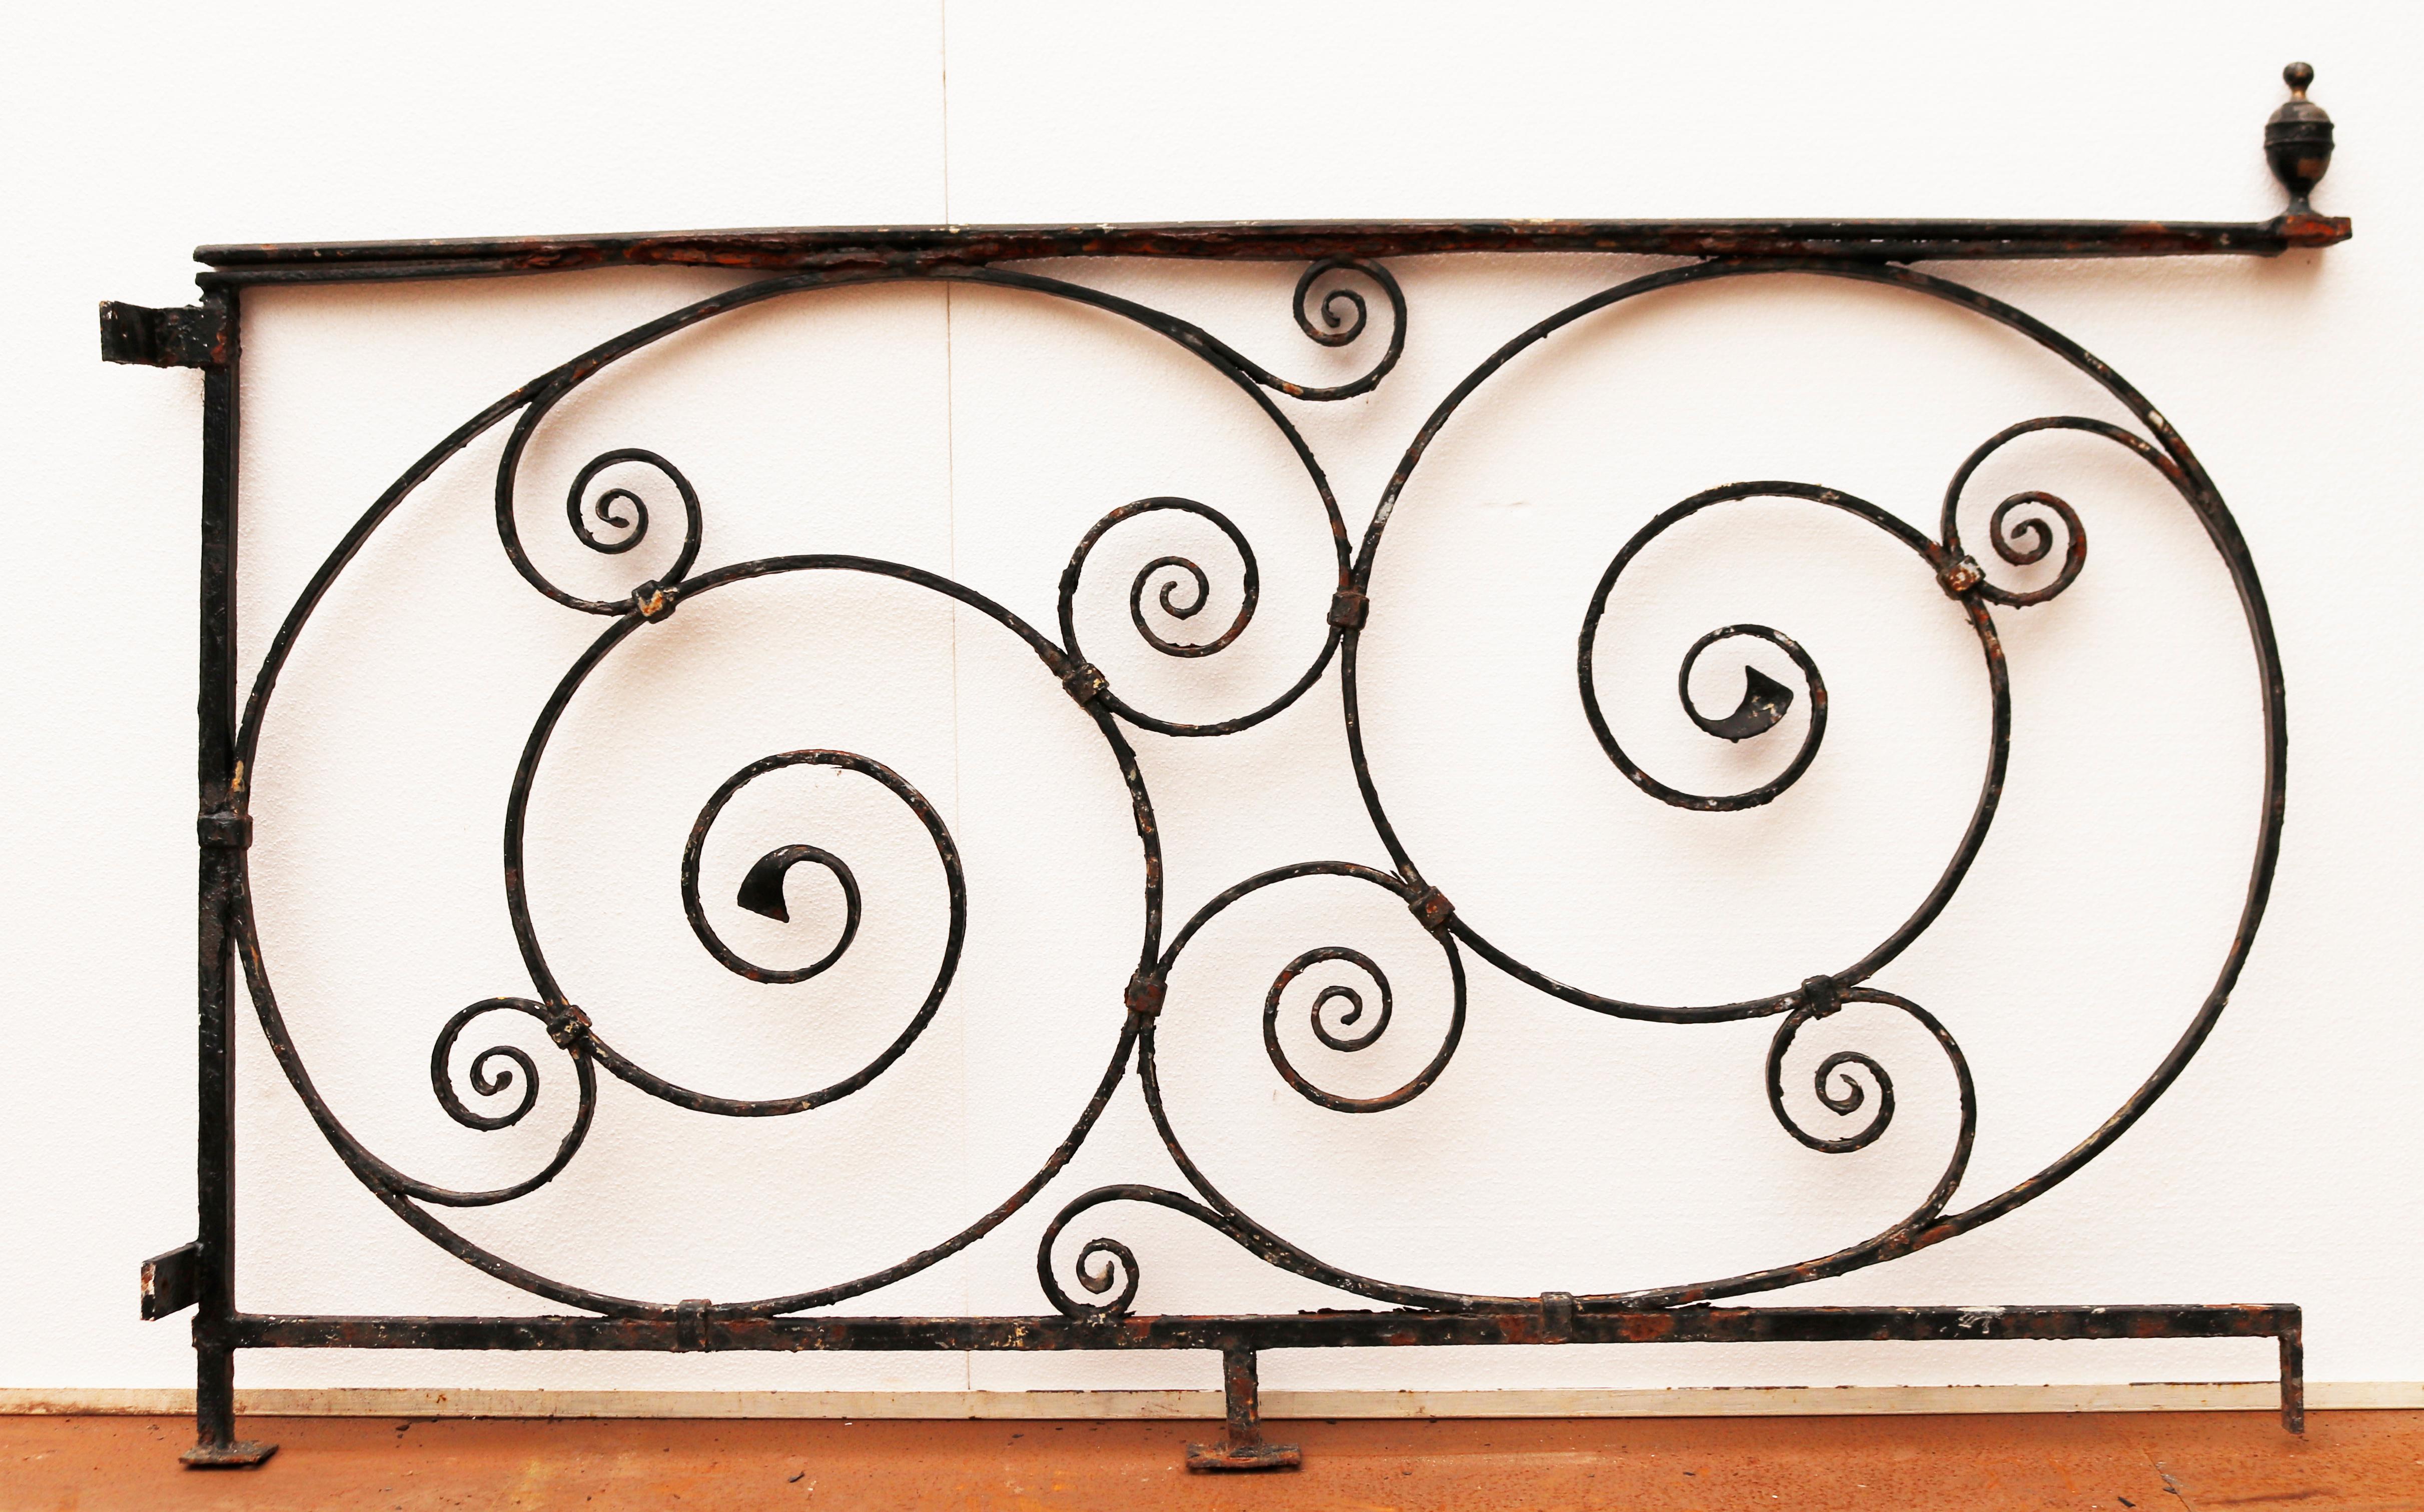 Antique wrought iron railings, 7.1 meter, with scrollwork pattern.

Additional dimensions

All three pieces are 84 cm in height (2 ft 7 inches)

Width of all three pieces side by side 715 cm (23 ft 4 inches)

Depth of all three pieces 4